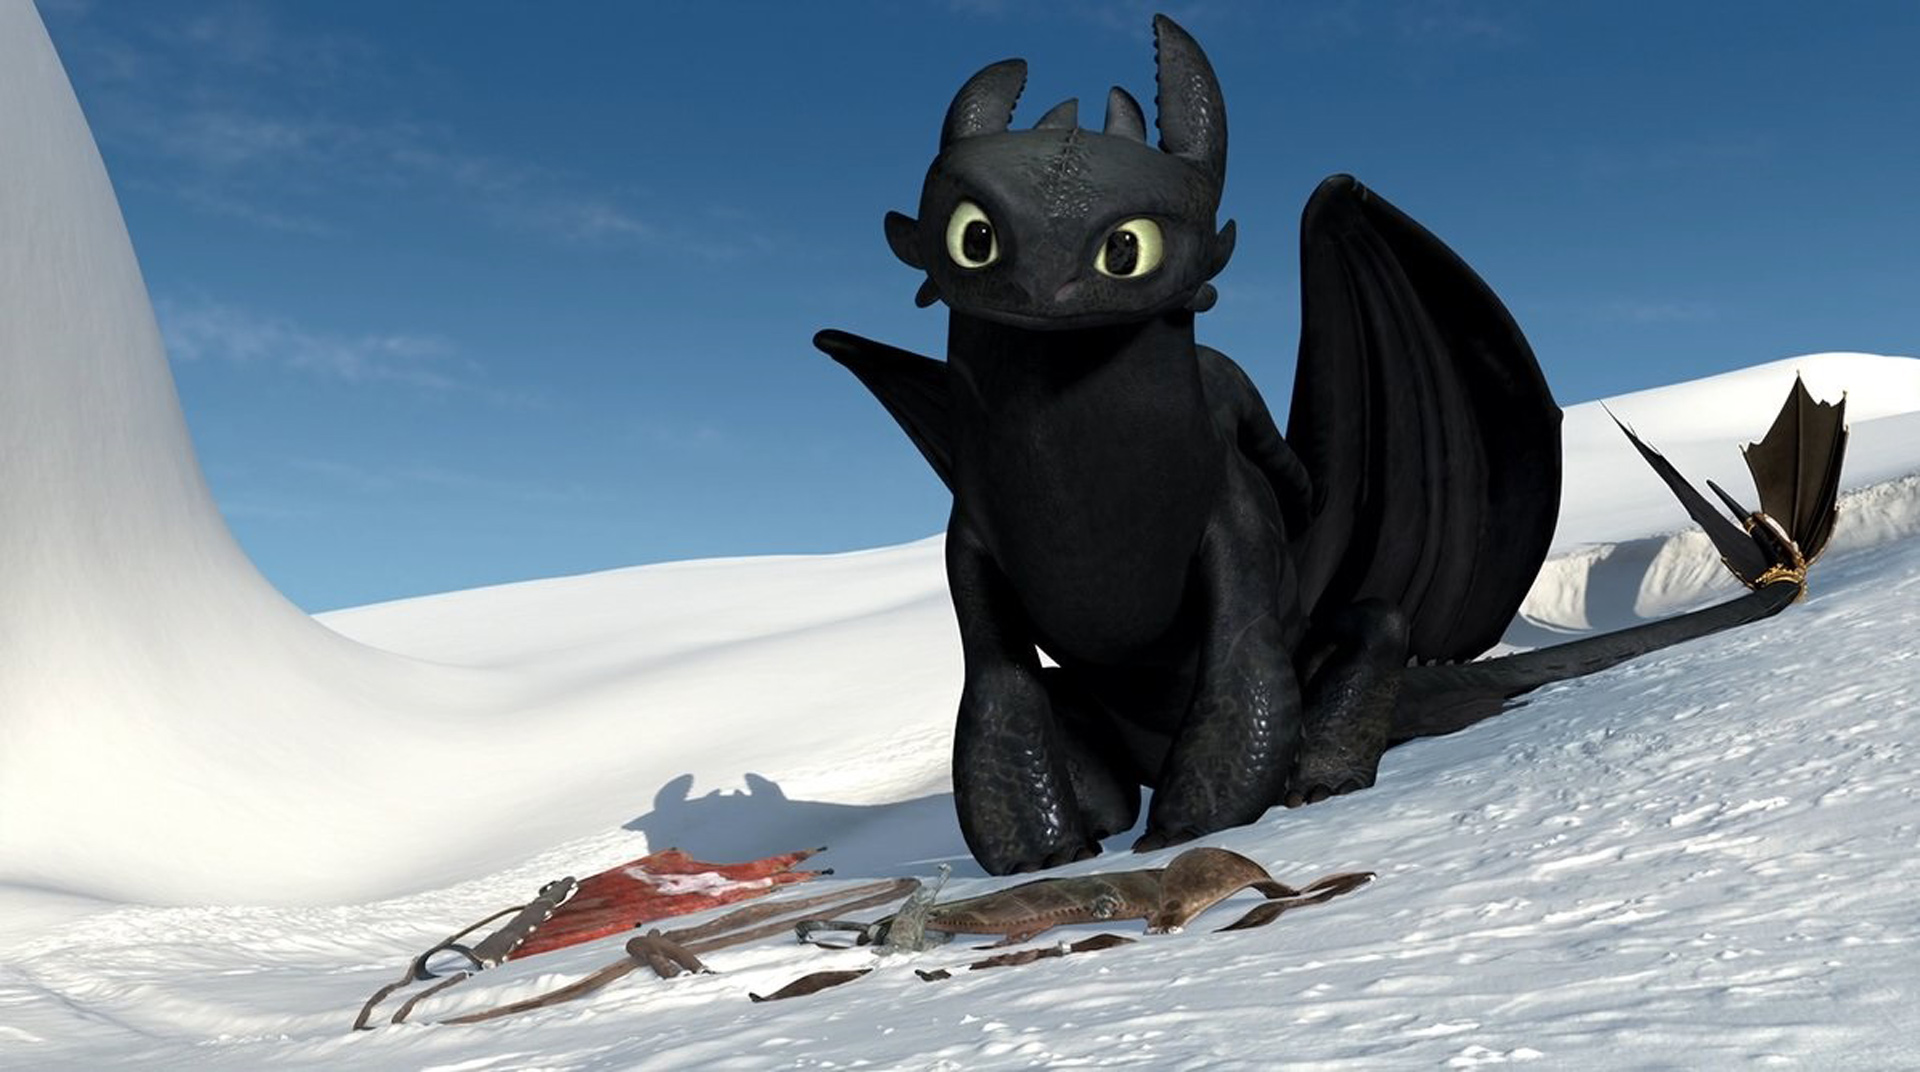 reservoir high school music how to train your dragon